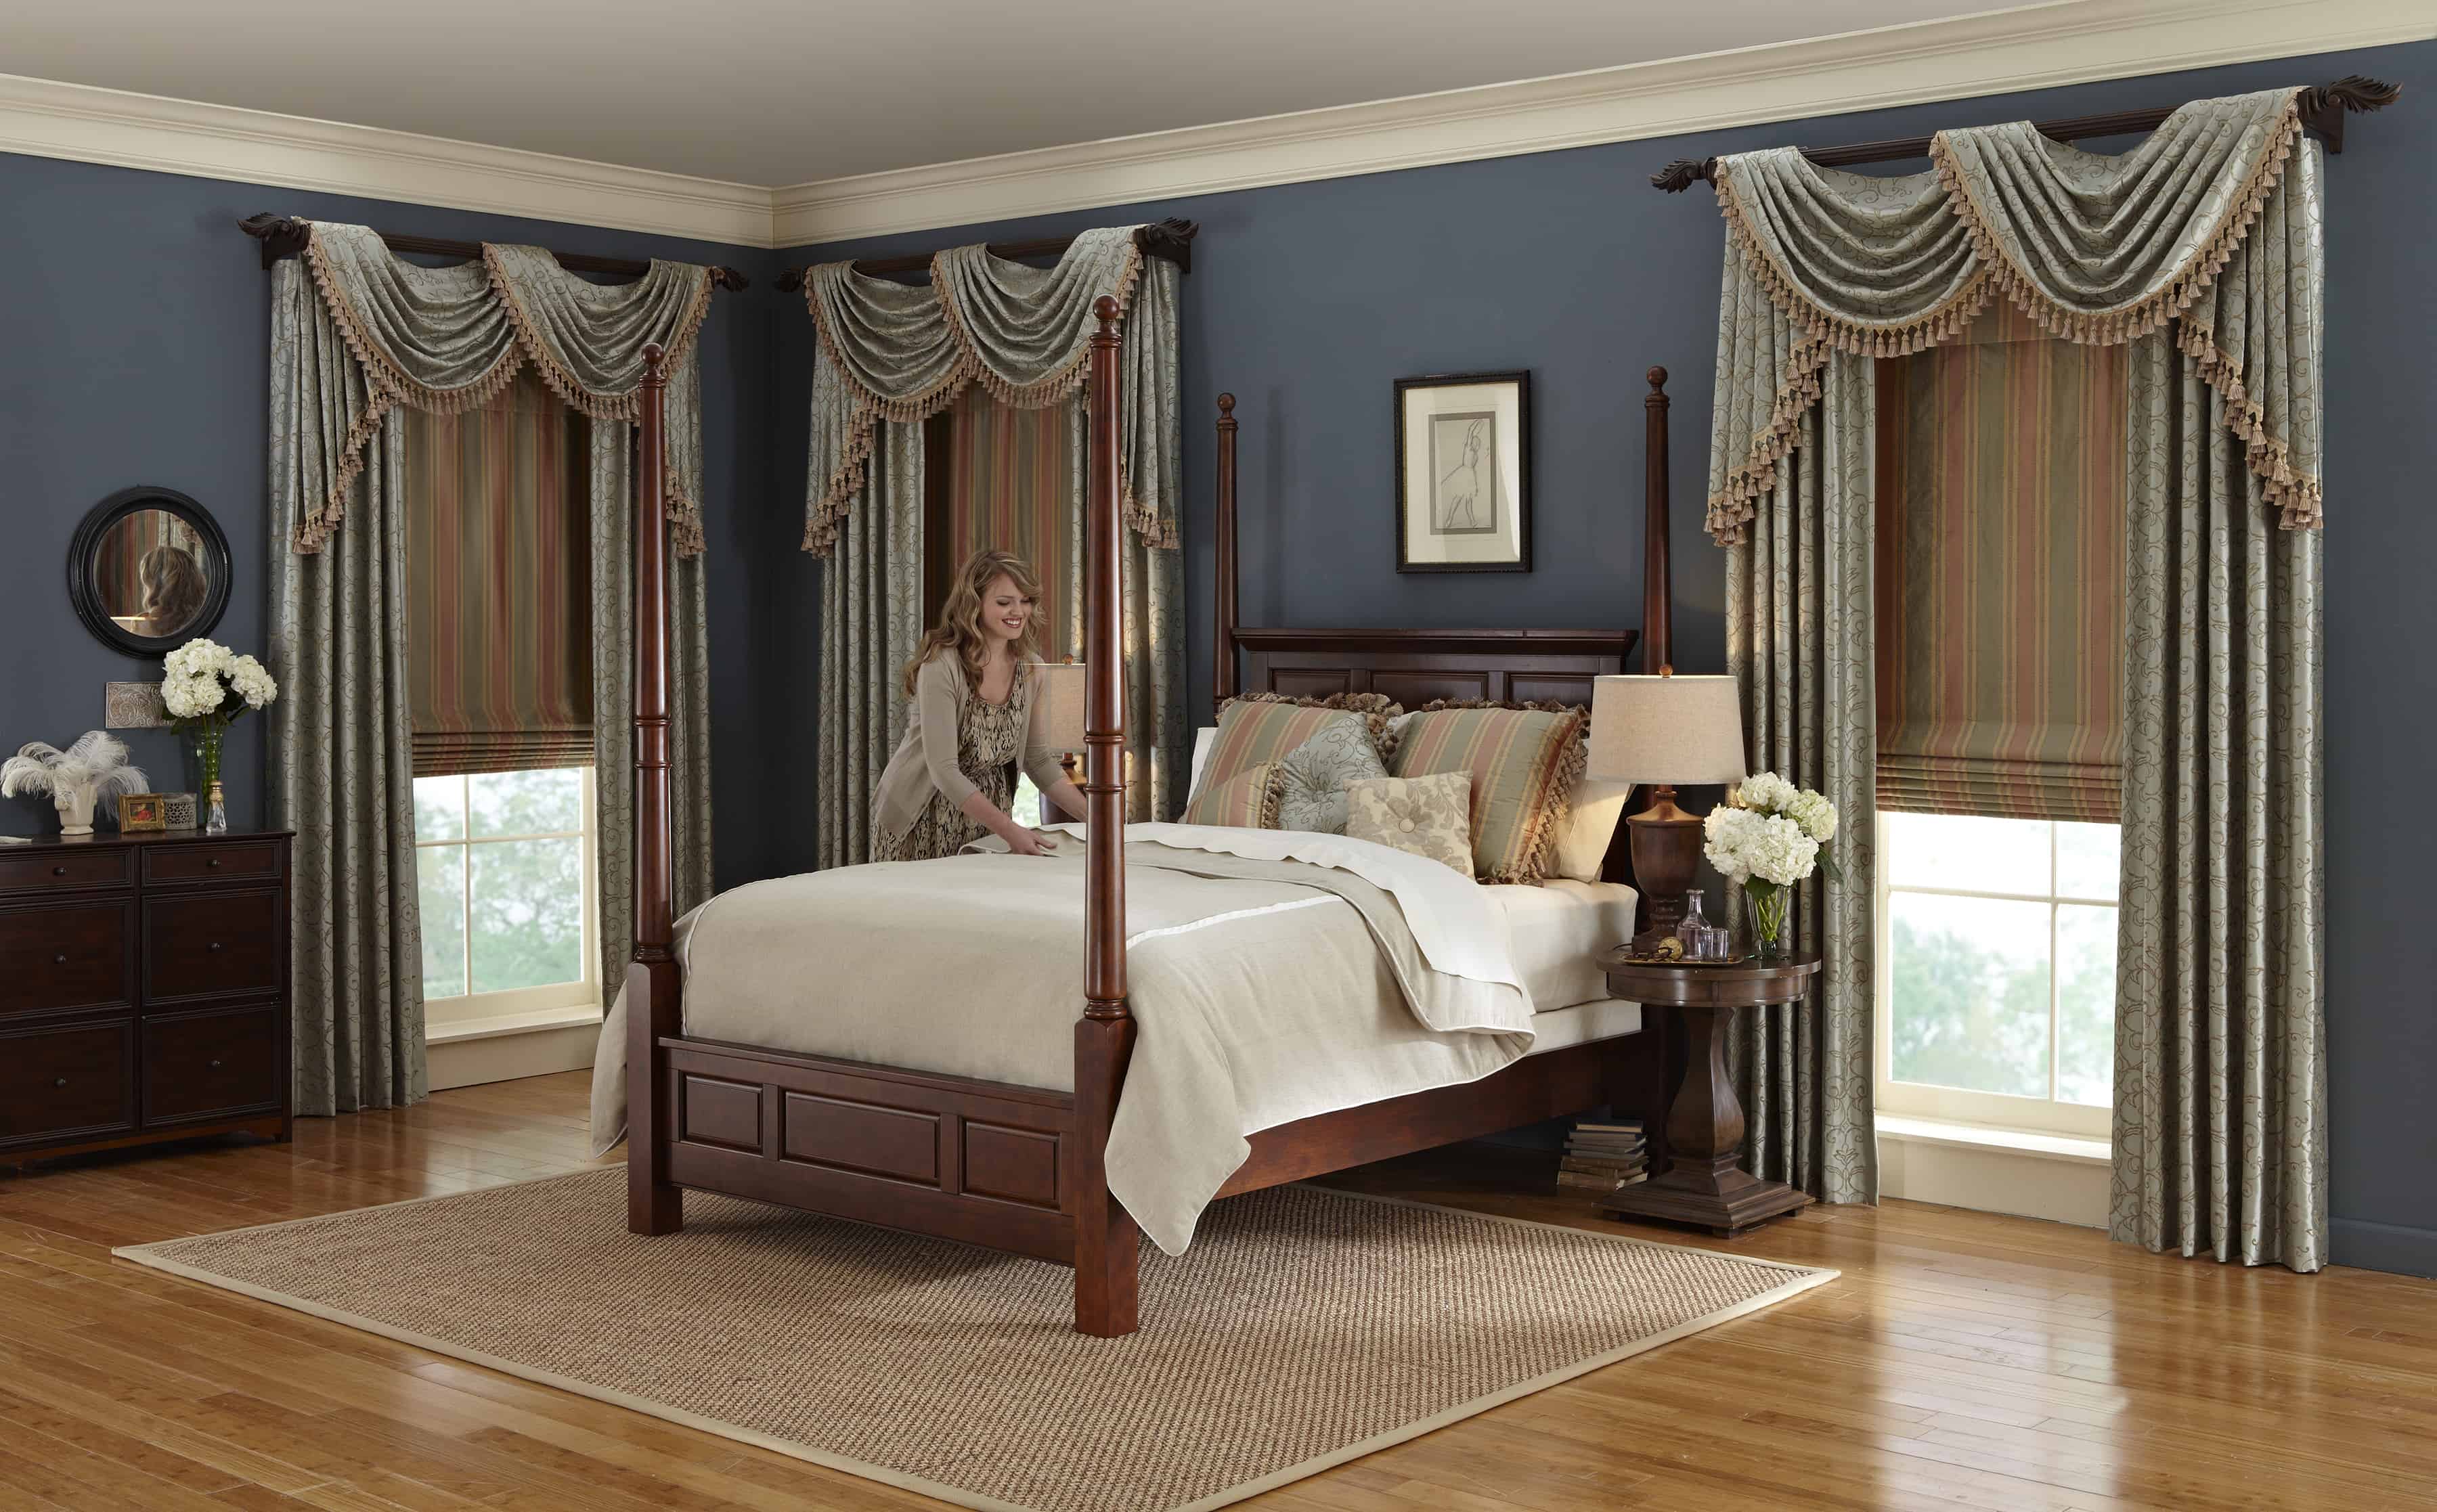 lady making bed with upscale top treatments